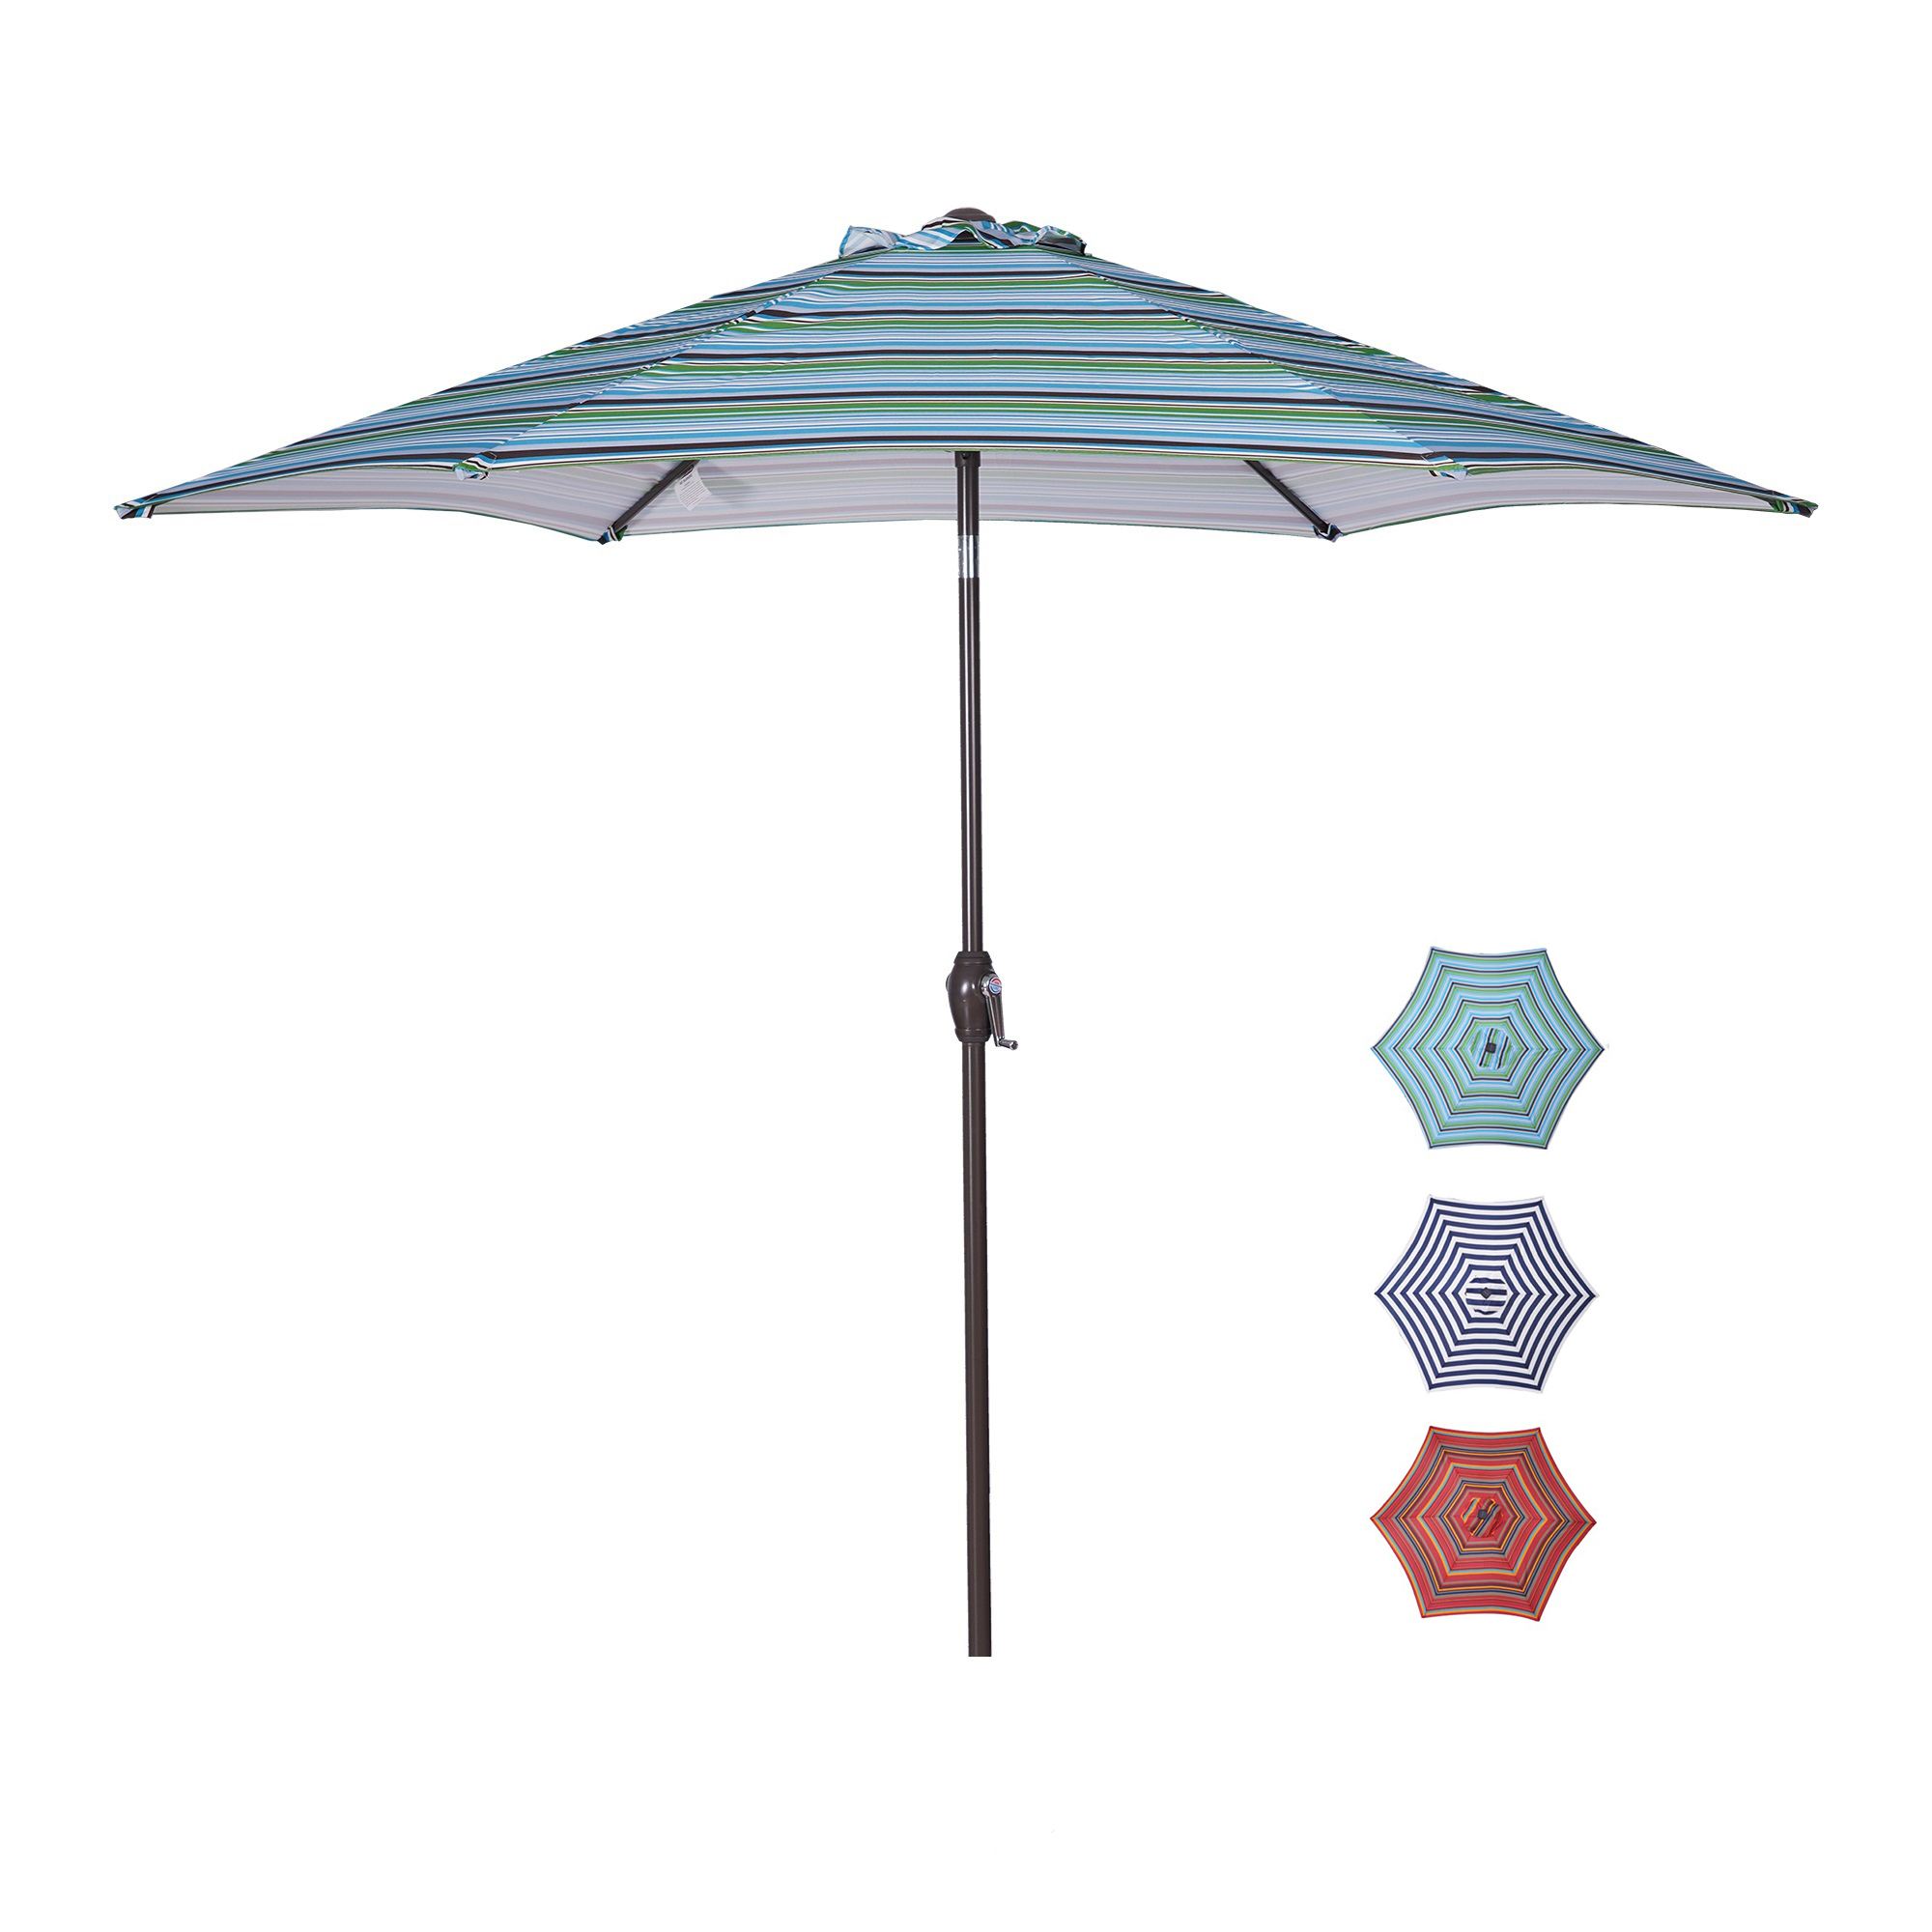 Outdoor Patio 8.6-Feet Market Table Umbrella with Push Button Tilt and Crank, Blue Stripes[Umbrella Base is not Included]-Boyel Living